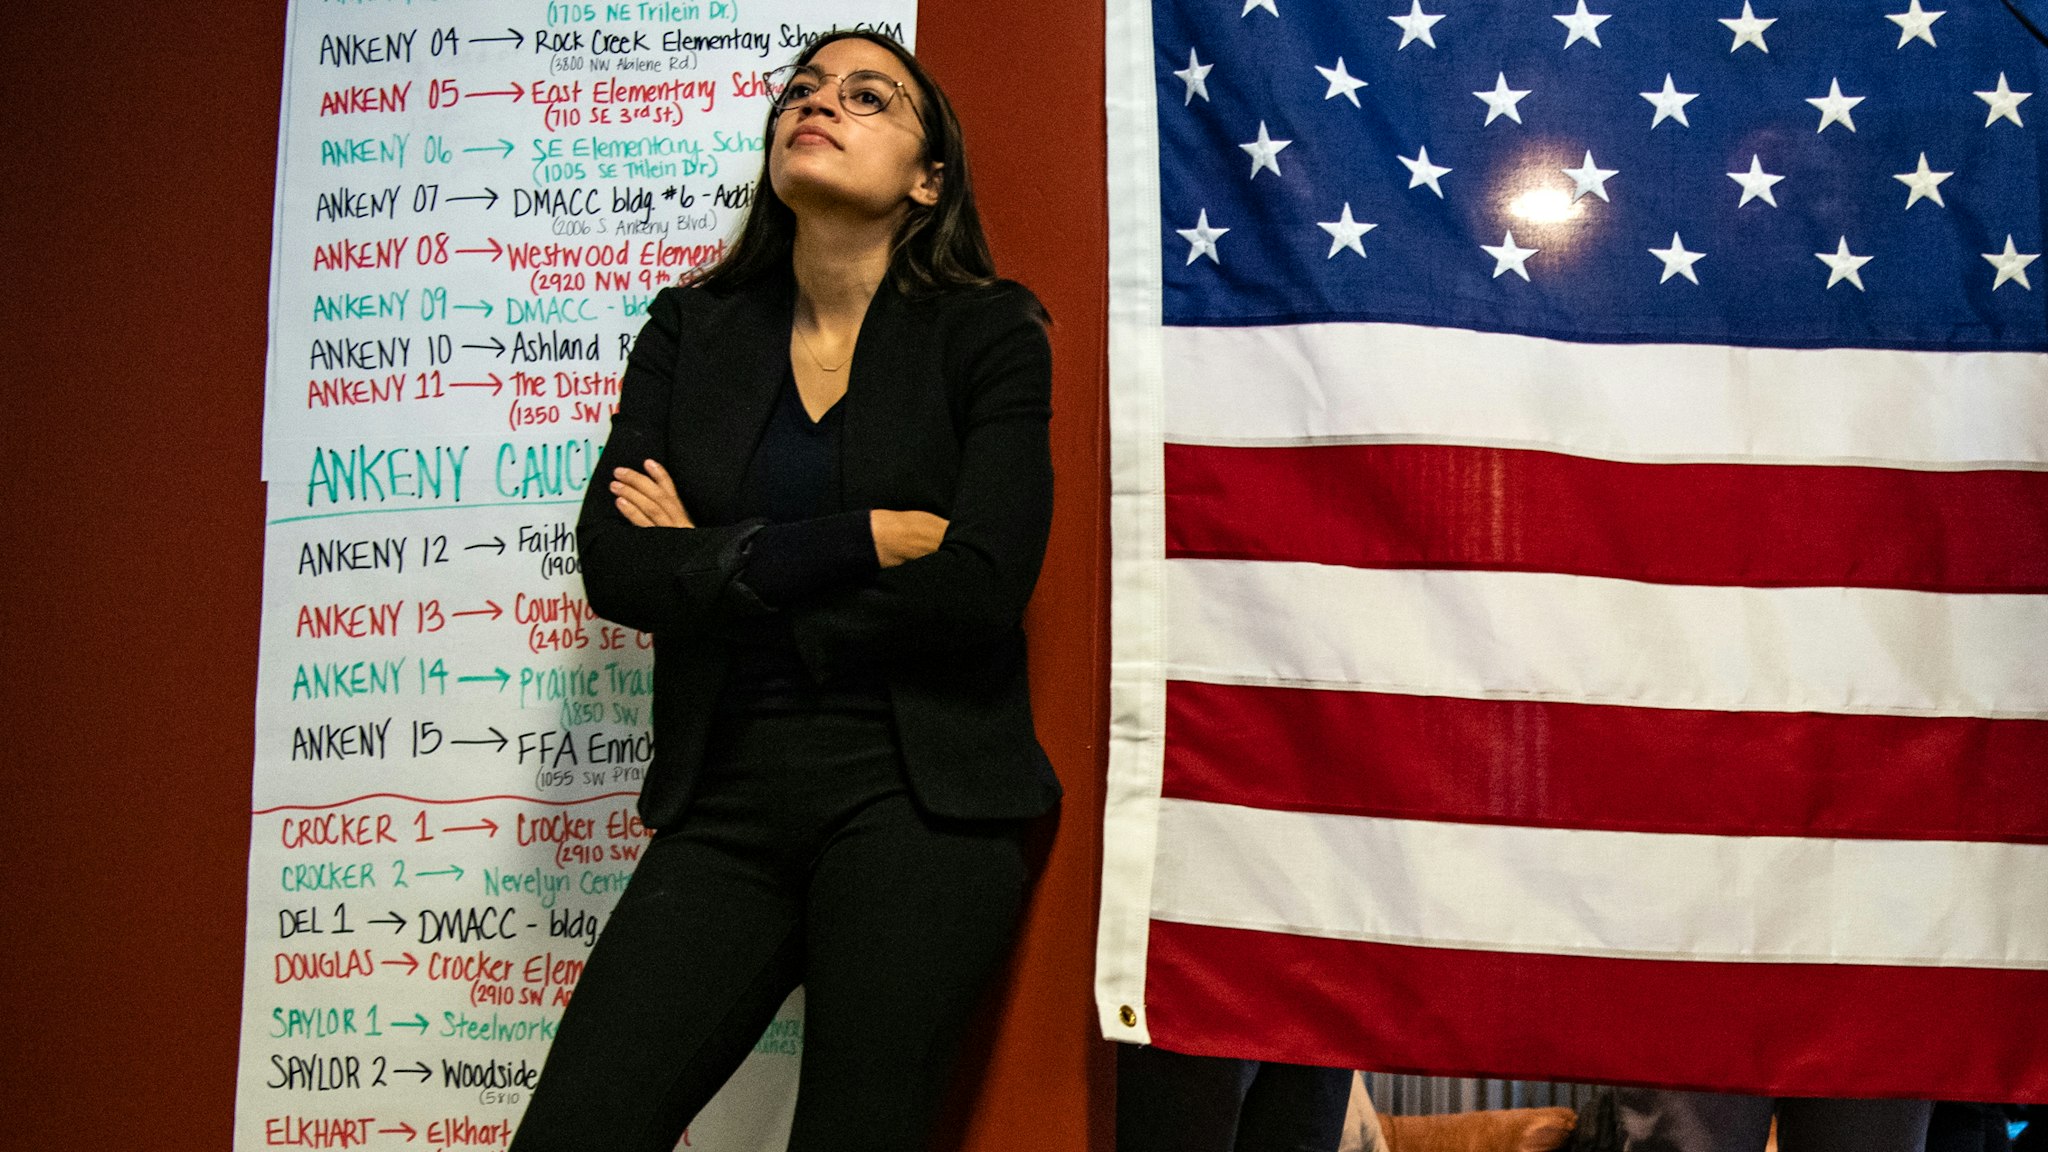 ANKENY, IOWA - JANUARY 26: Rep. Alexandria Ocasio-Cortez, D-N.Y. listens as Sen. Bernie Sanders, I-Vt., 2020 Democratic Presidential Candidate, speak to volunteers and supporters at Ankeny Field Office during a campaign stop on Sunday, January 26, 2020 in Ankeny, Iowa.